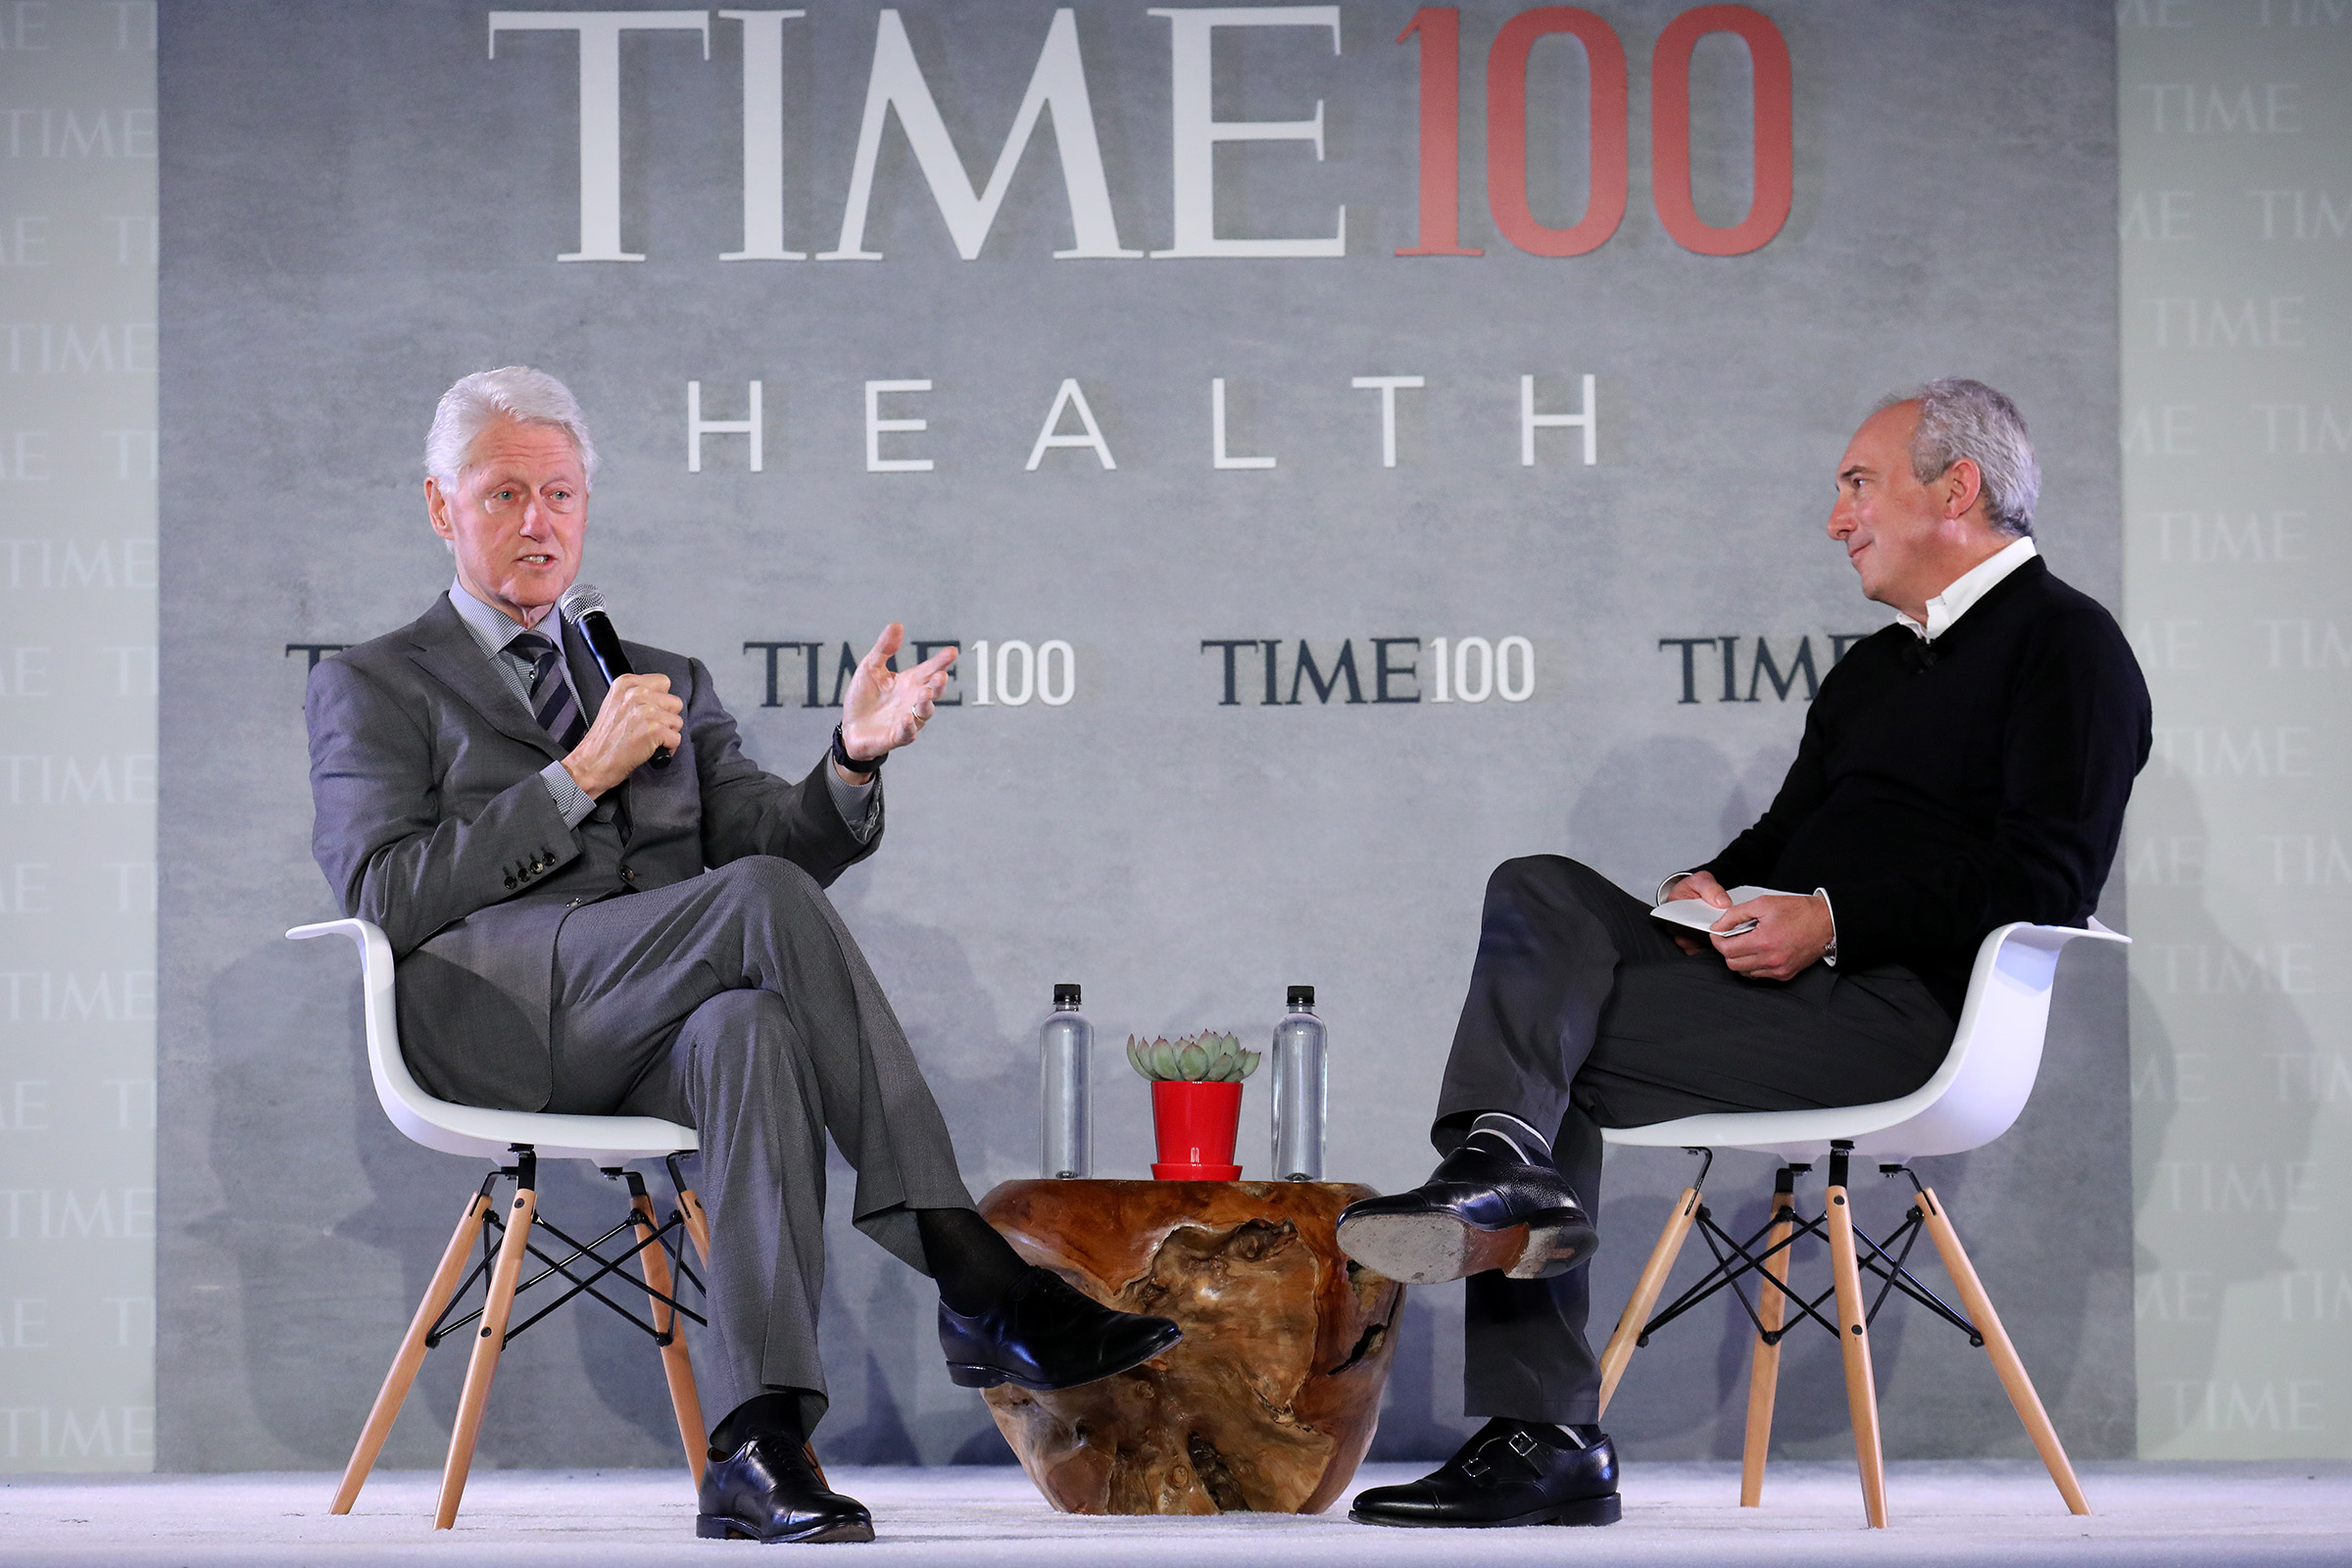 Former U.S. President Bill Clinton (L) speaks with Dr. David Agus,  CEO of the Lawrence J. Ellison Institute for Transformative.Medicine at USC during the TIME 100 Health Summit at Pier 17 in New York City on Oct. 17, 2019. (Brian Ach—Getty Images for TIME 100 Health)